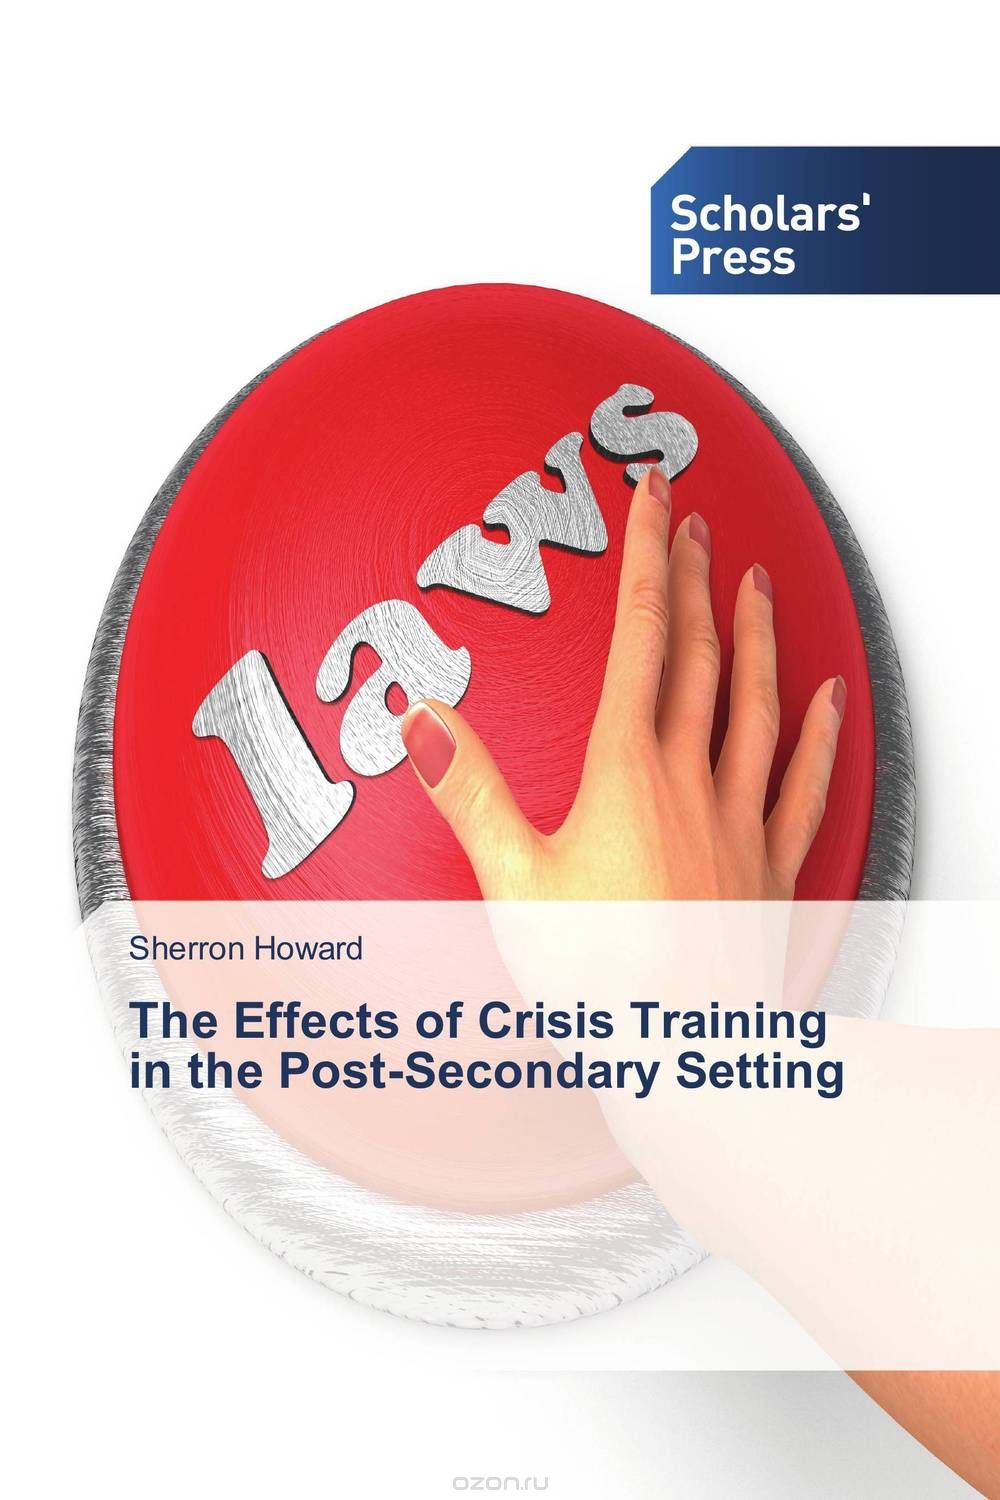 Скачать книгу "The Effects of Crisis Training in the Post-Secondary Setting"